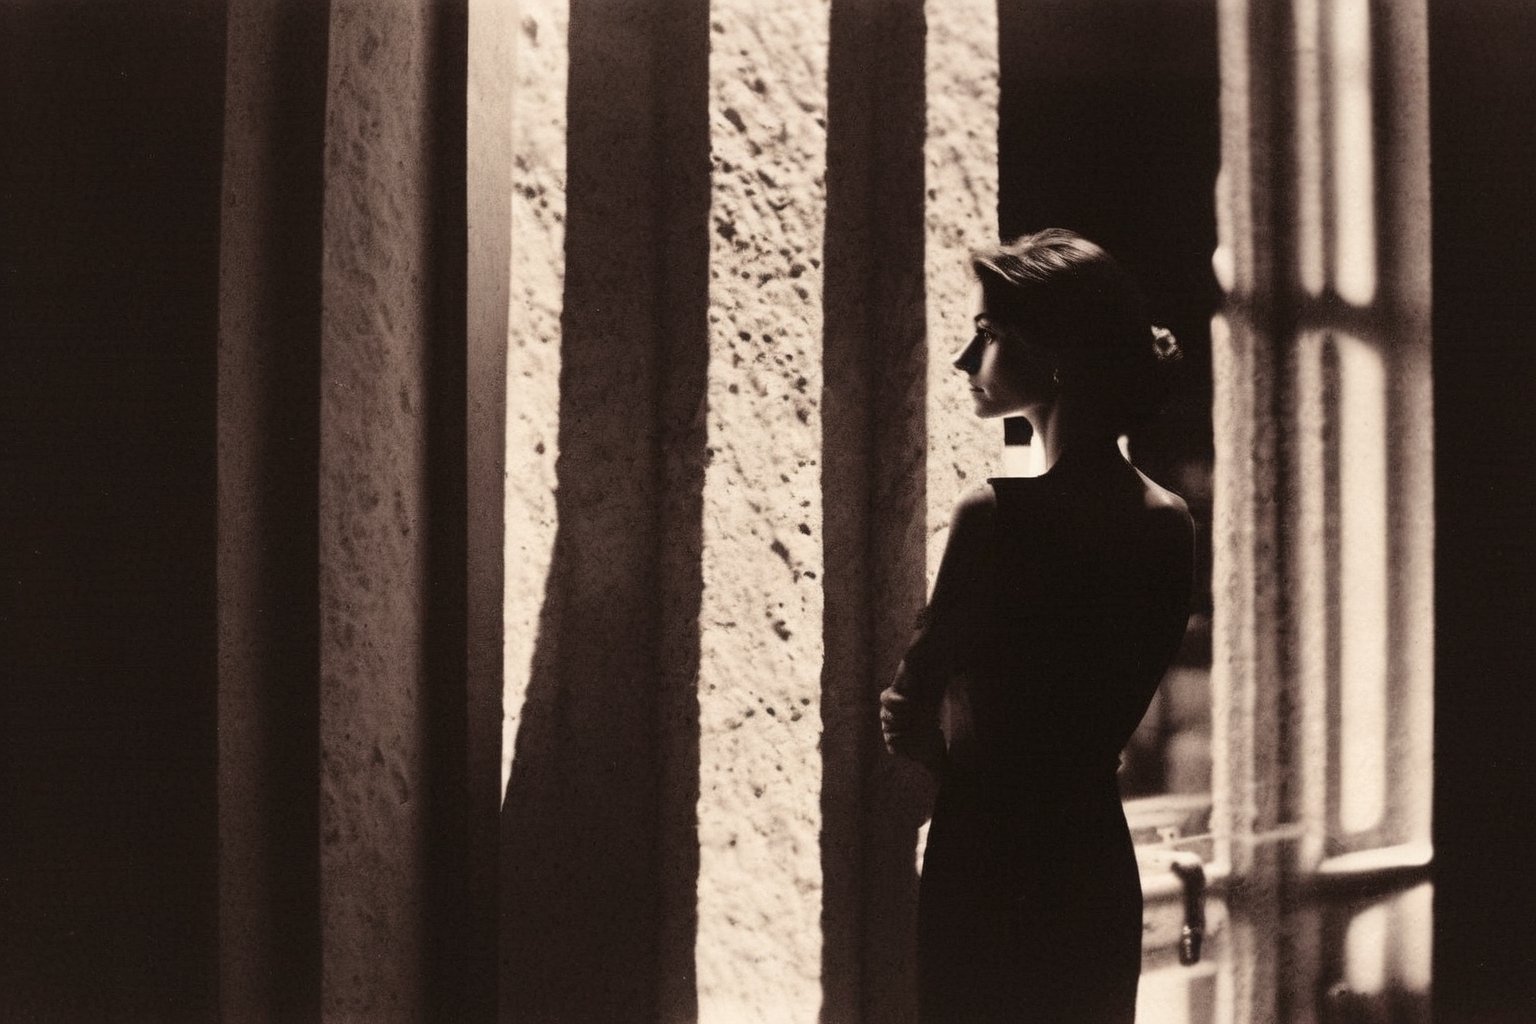 lith_argenta_bromBN1W, portrait photo of an Italian woman looking out of a window, natural skin texture, hard shadows, film grain